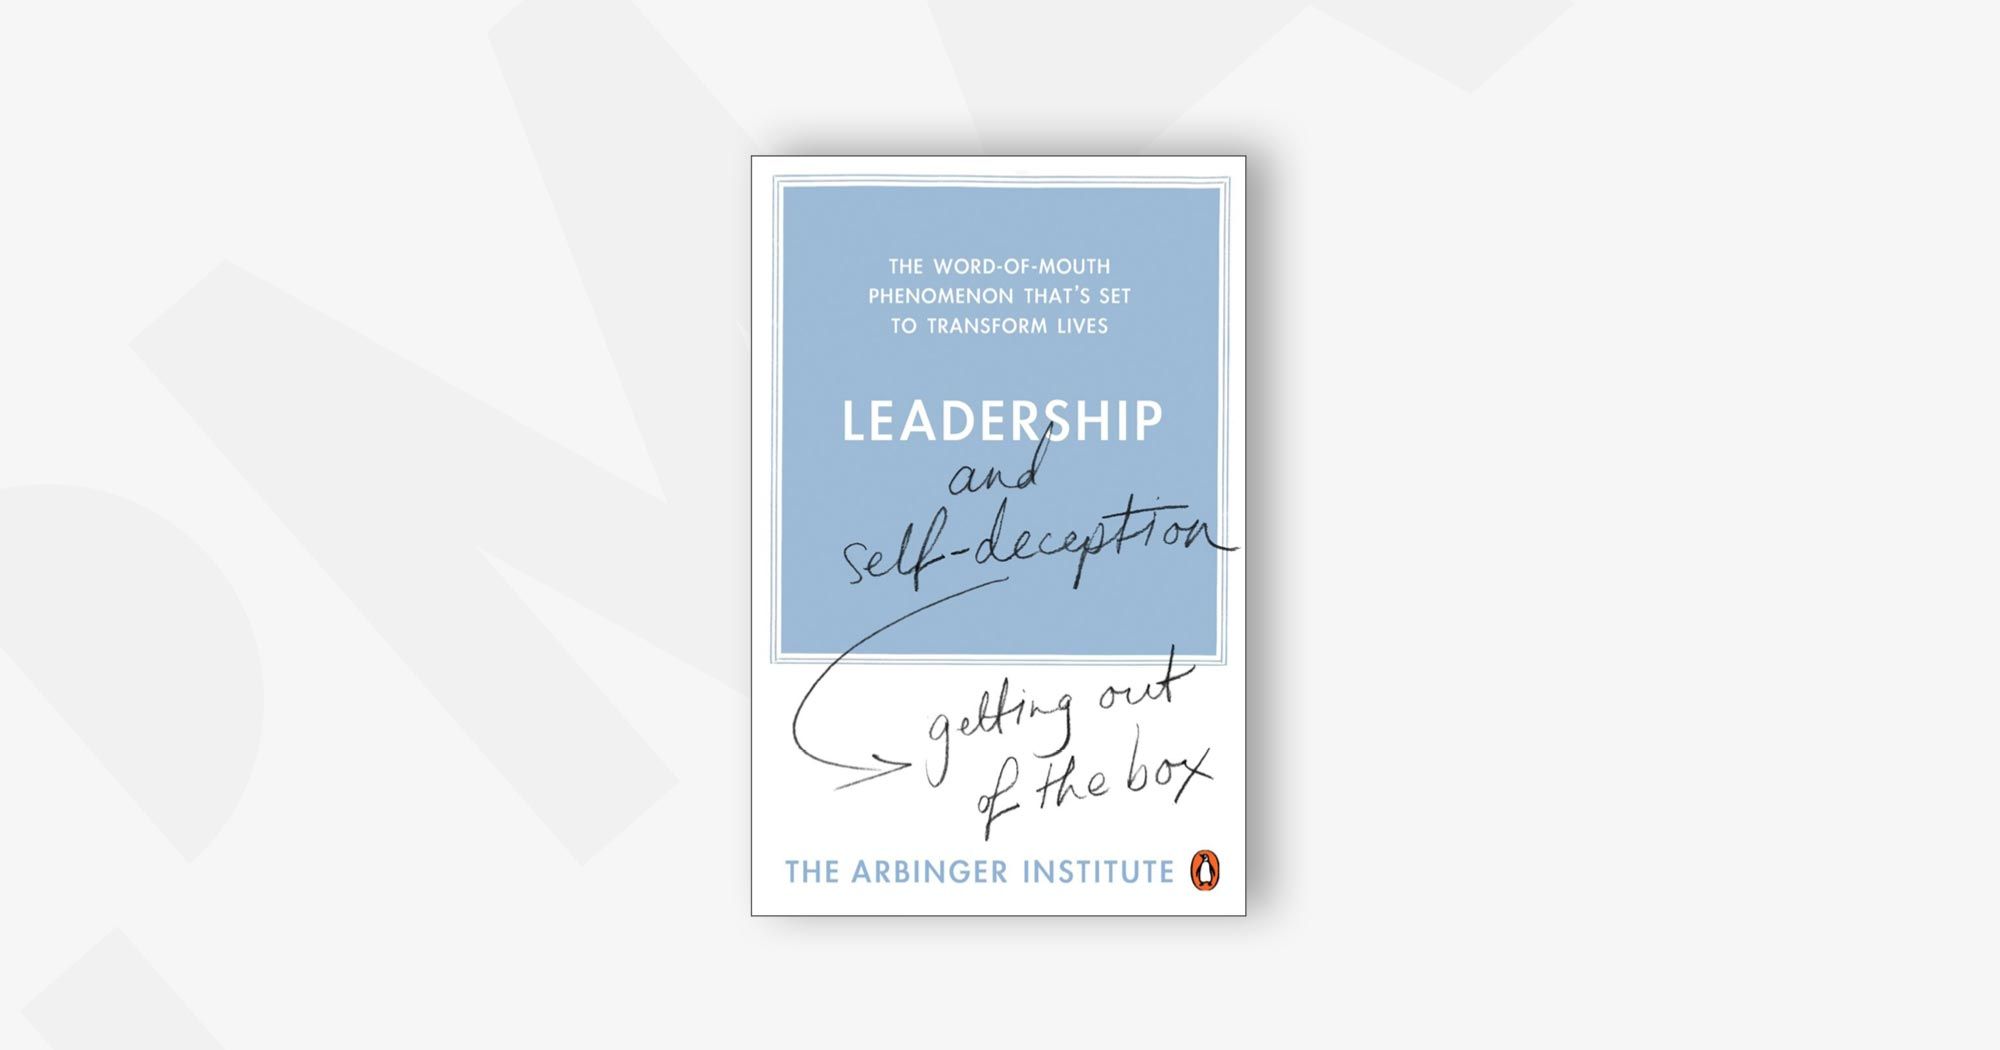 Leadership and Self-Deception: Getting out of the Box – The Arbinger Institute